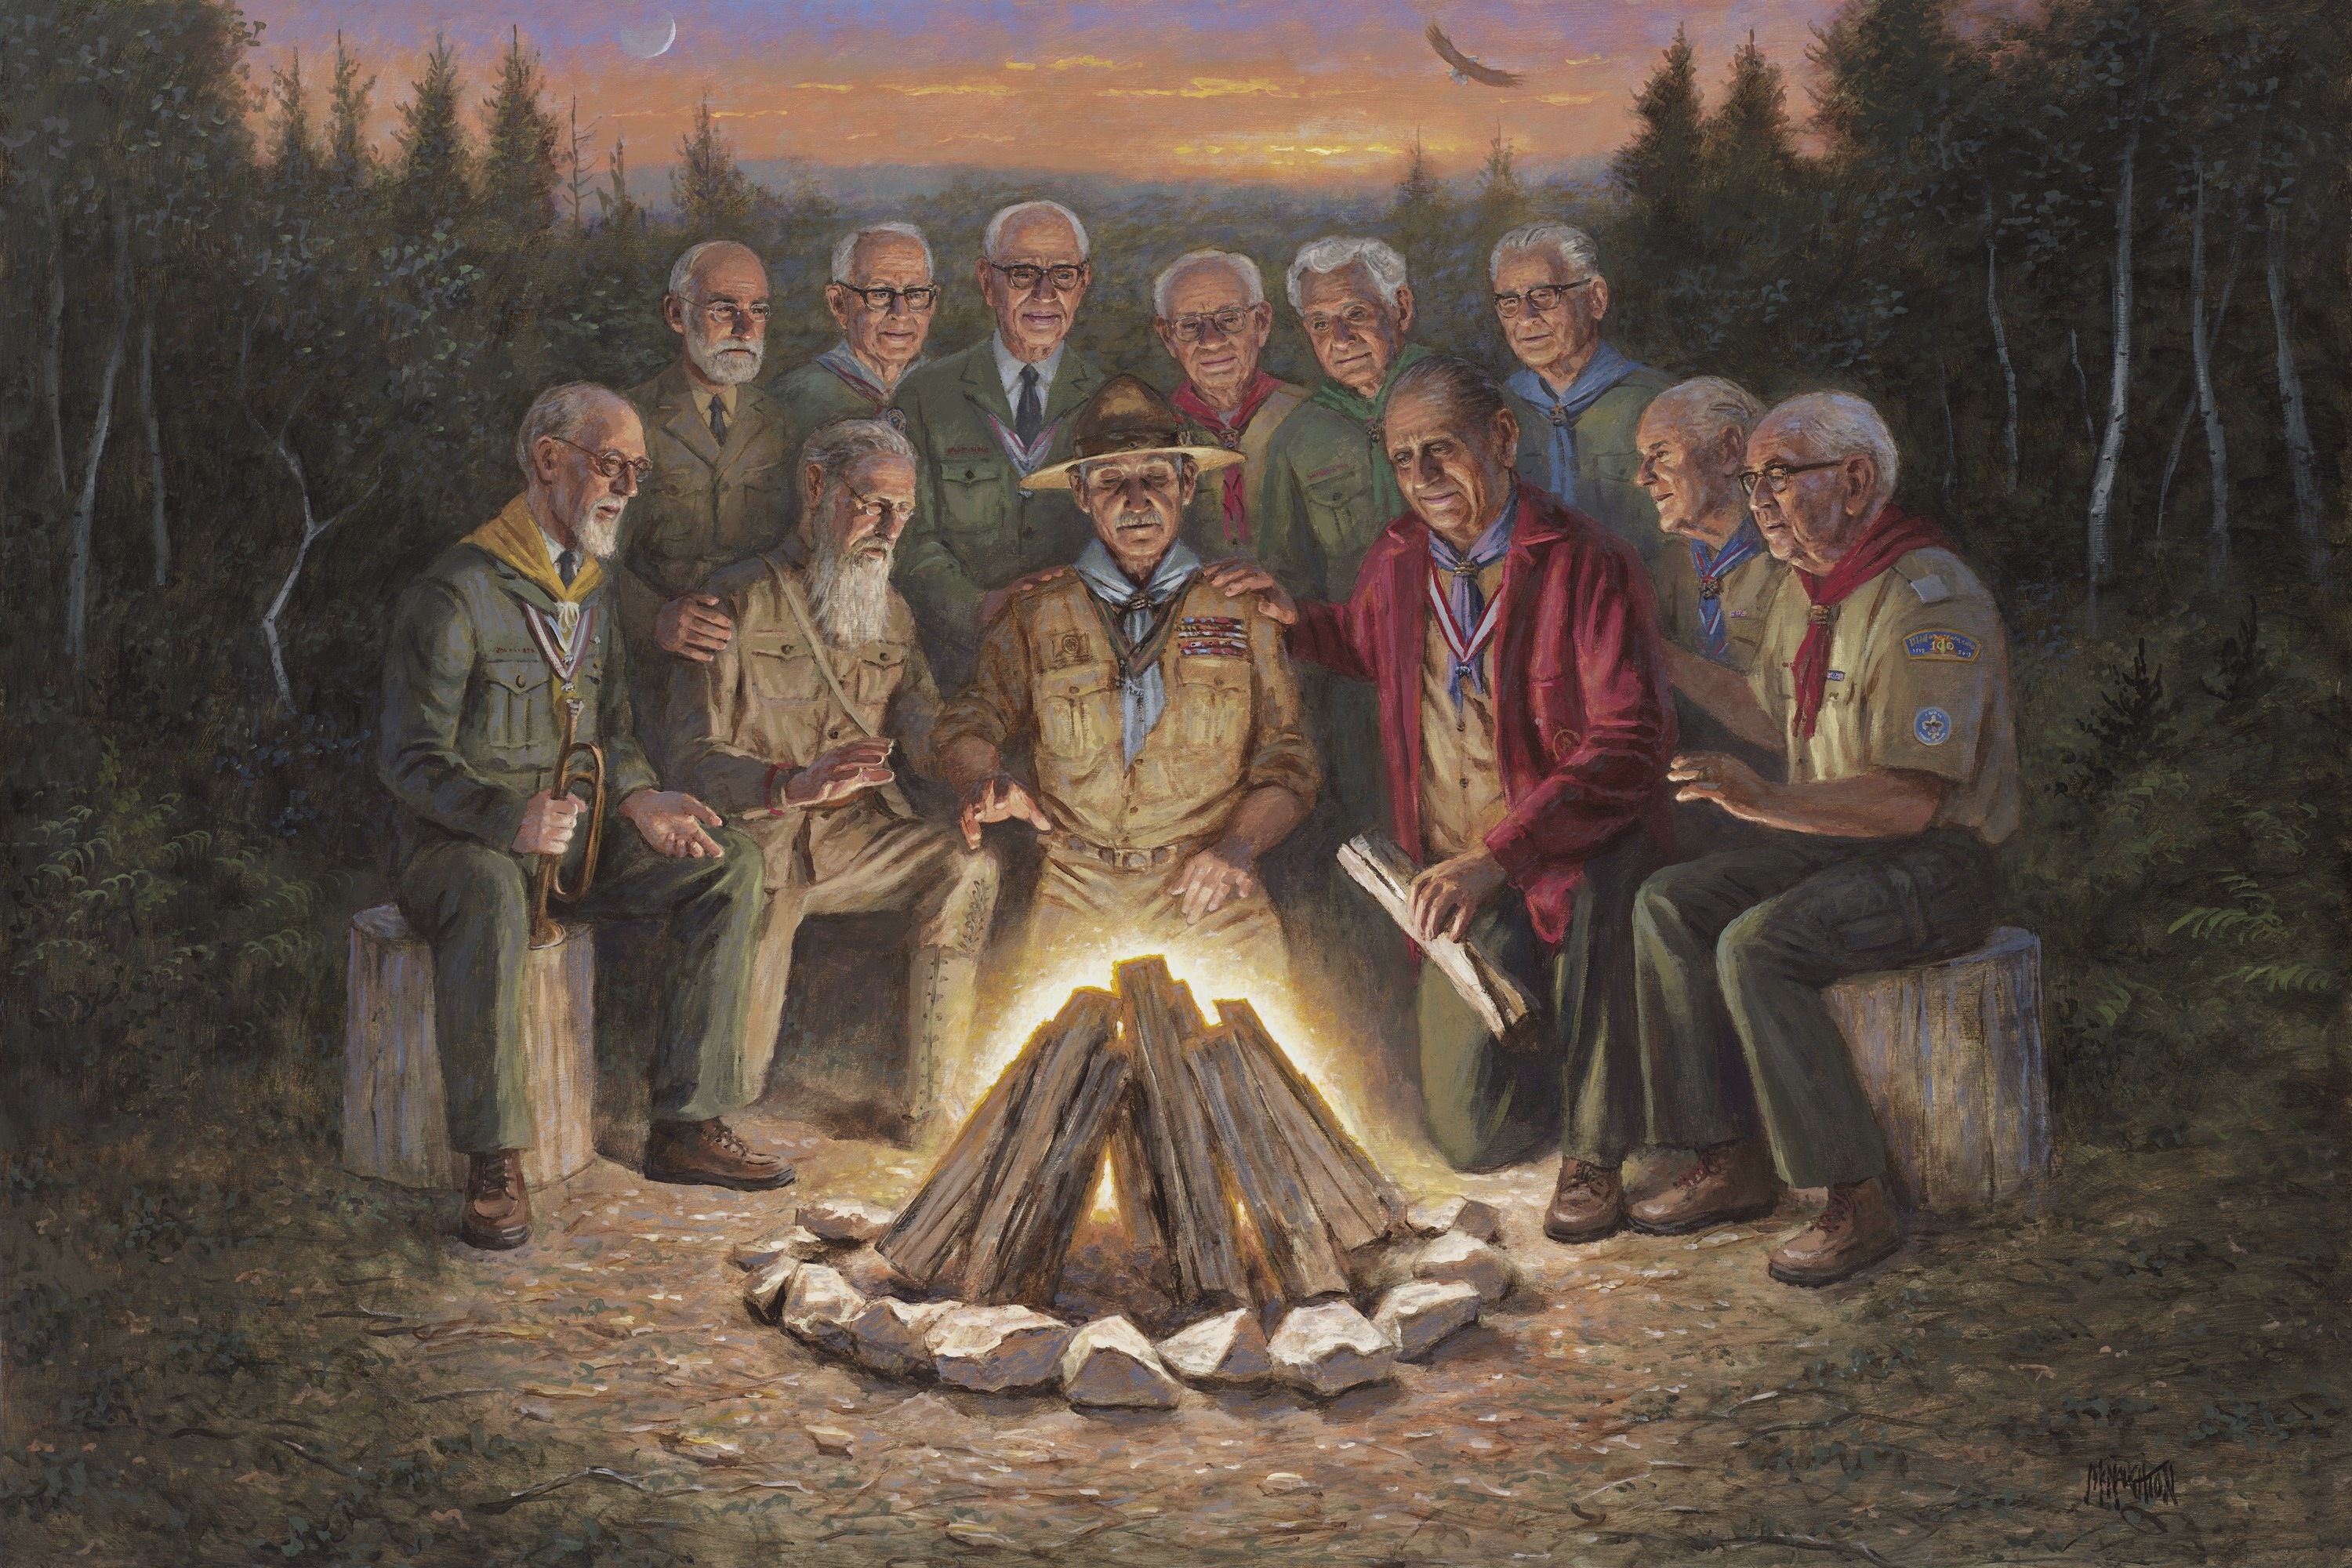 artistic, painting, campfire, camping, outdoor